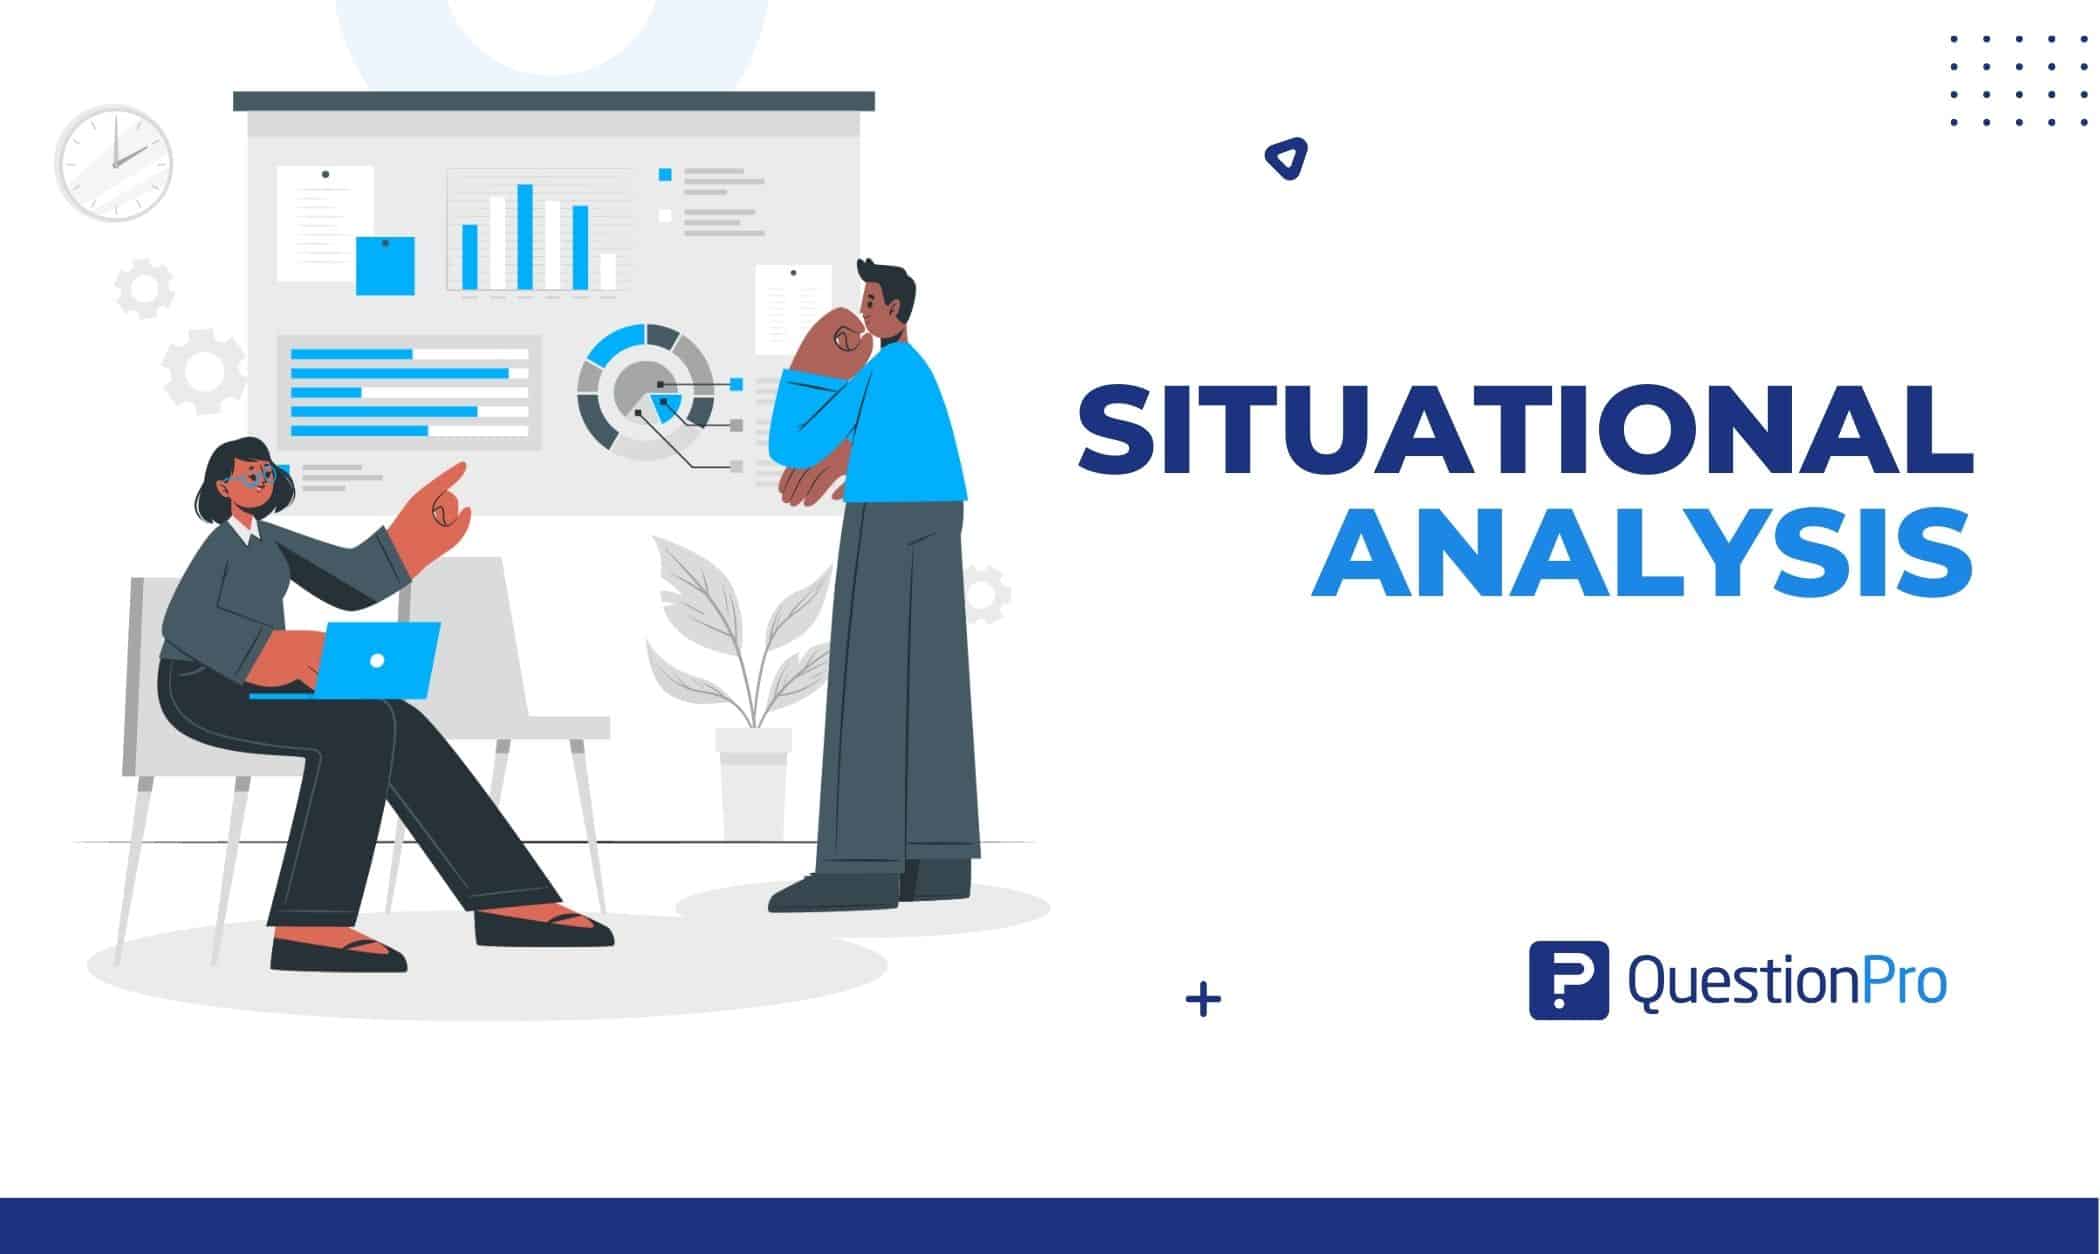 Situational analysis examines how a business maintains its internal and external context. Learn everything you need to know in this post.